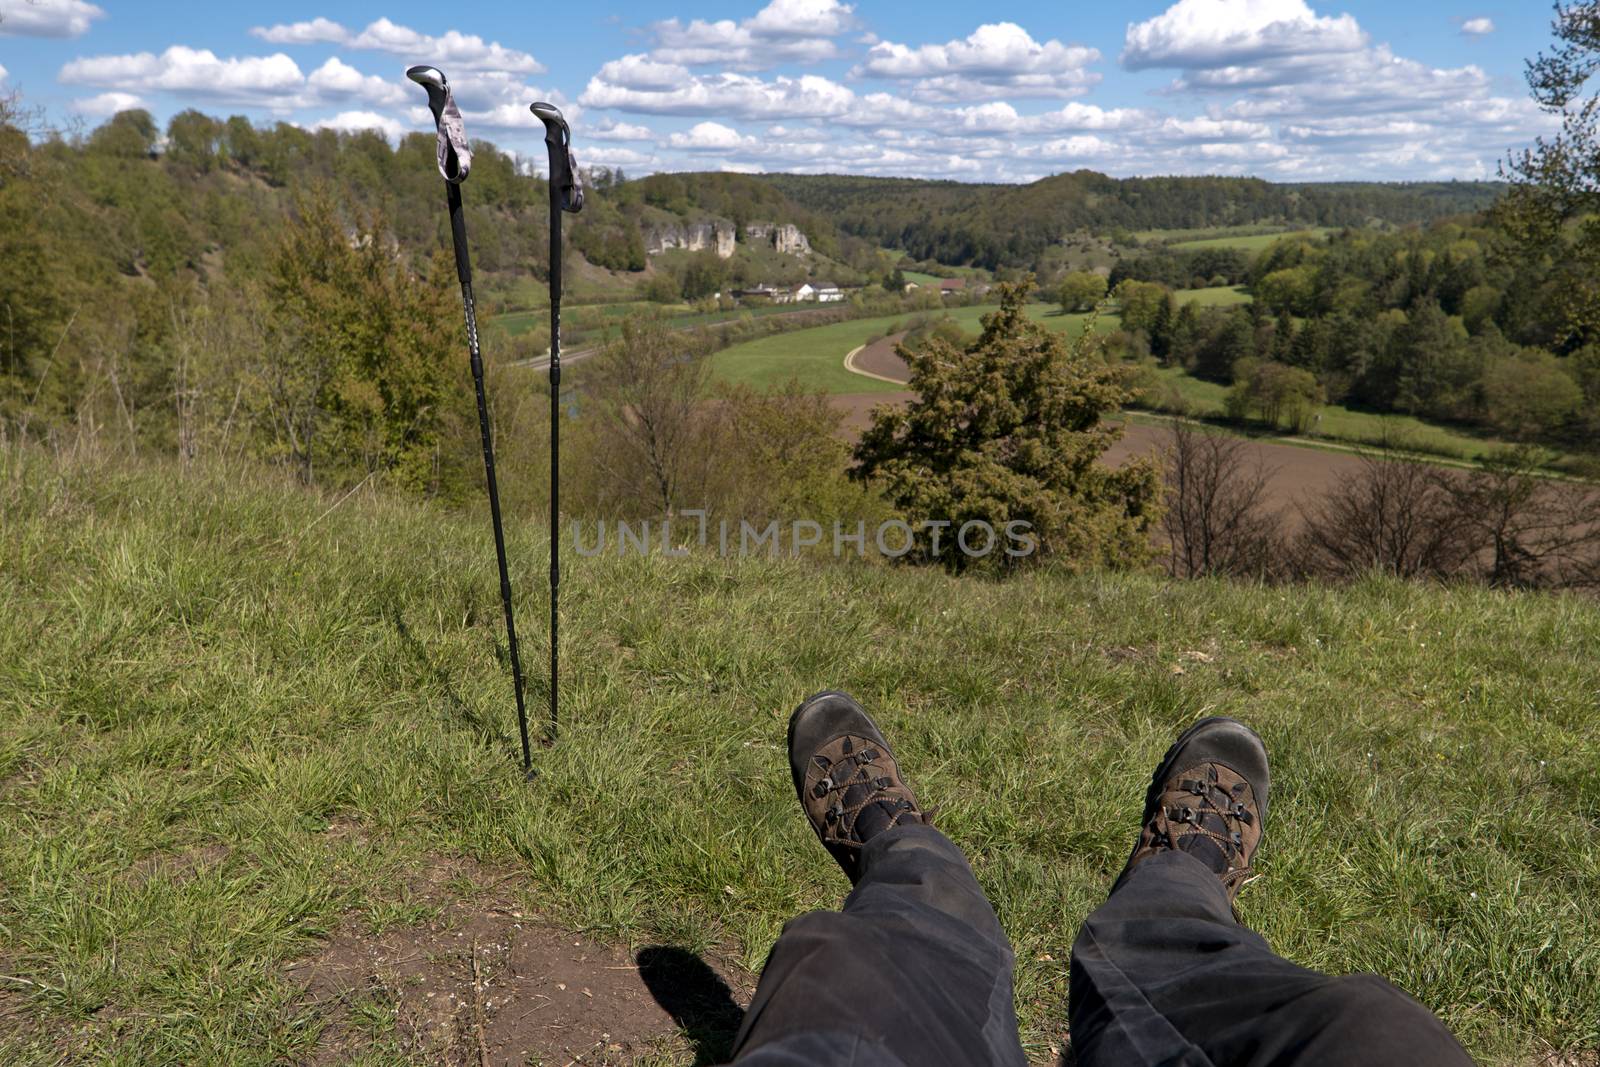 On the Altmuehltal Panorama Trail in Germany by 3quarks